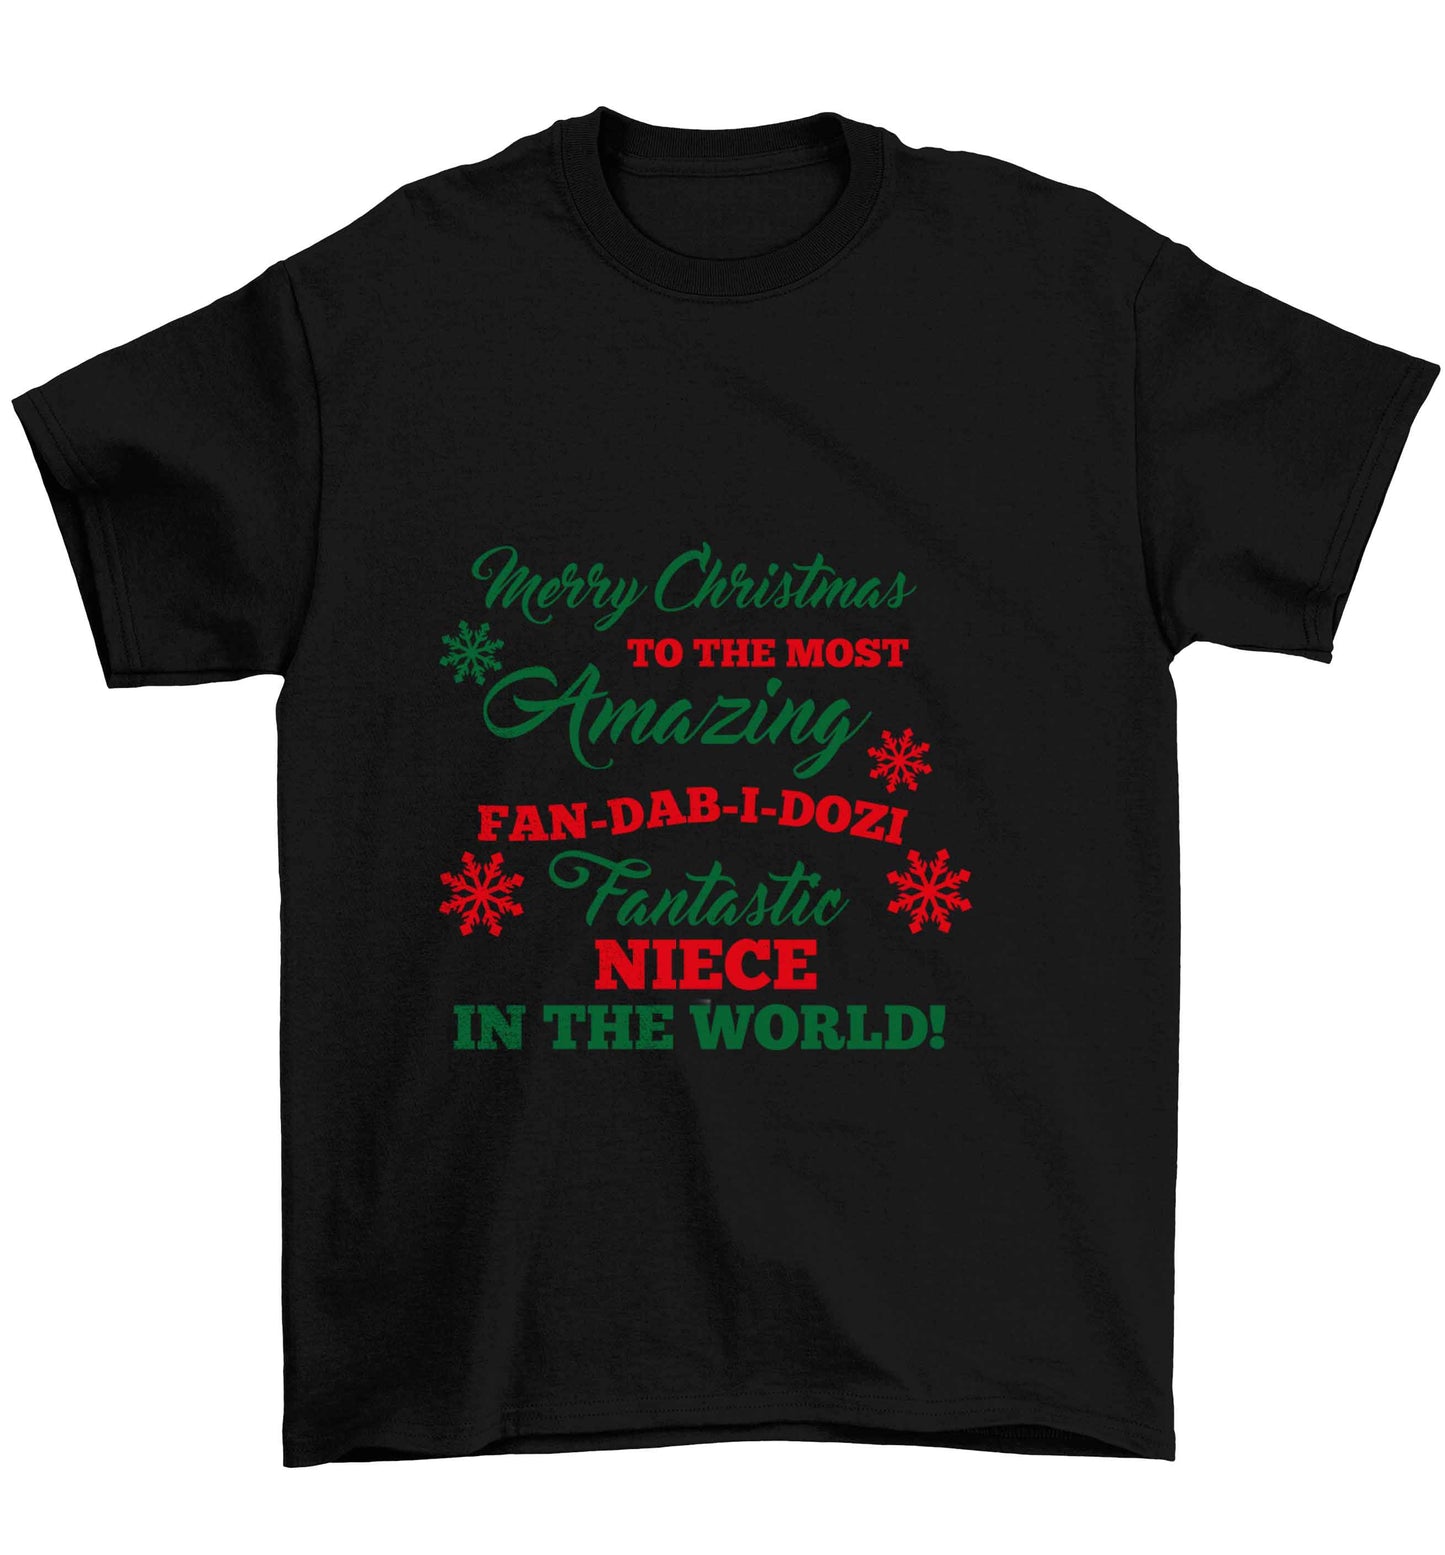 Merry Christmas to the most amazing fan-dab-i-dozi fantasic Niece in the world Children's black Tshirt 12-13 Years